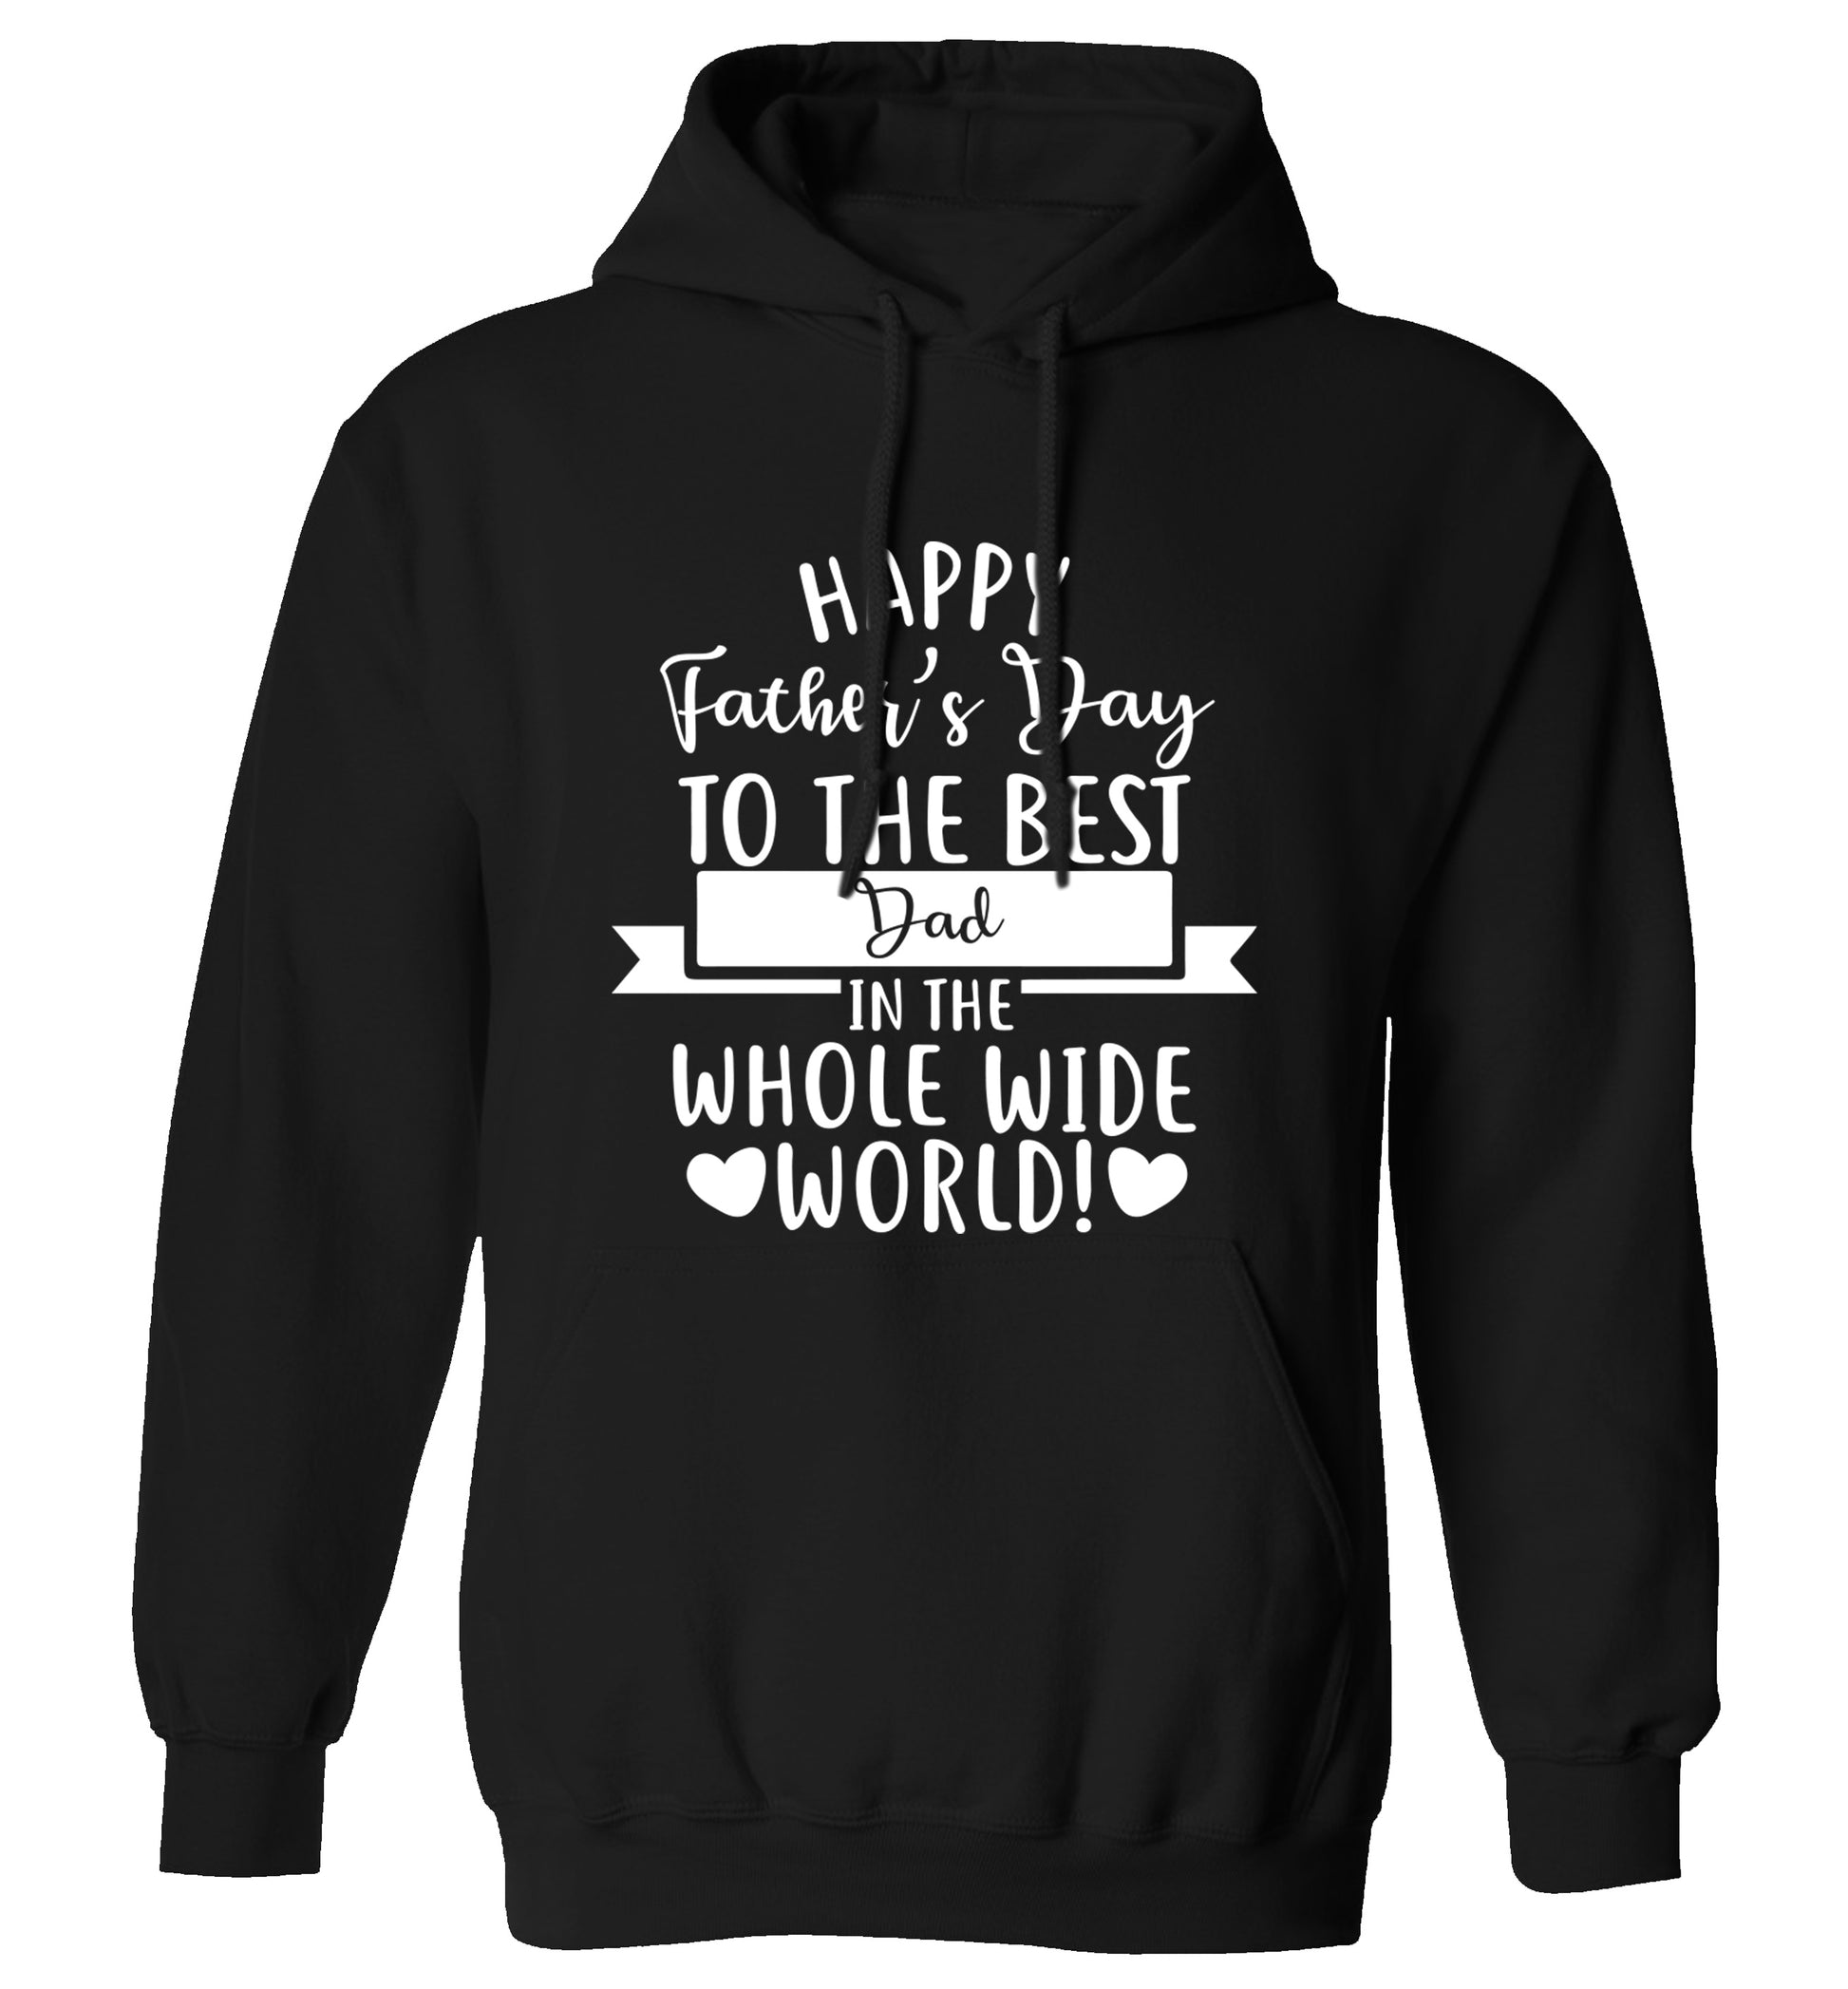 Happy Father's Day to the best father in the world! adults unisex black hoodie 2XL